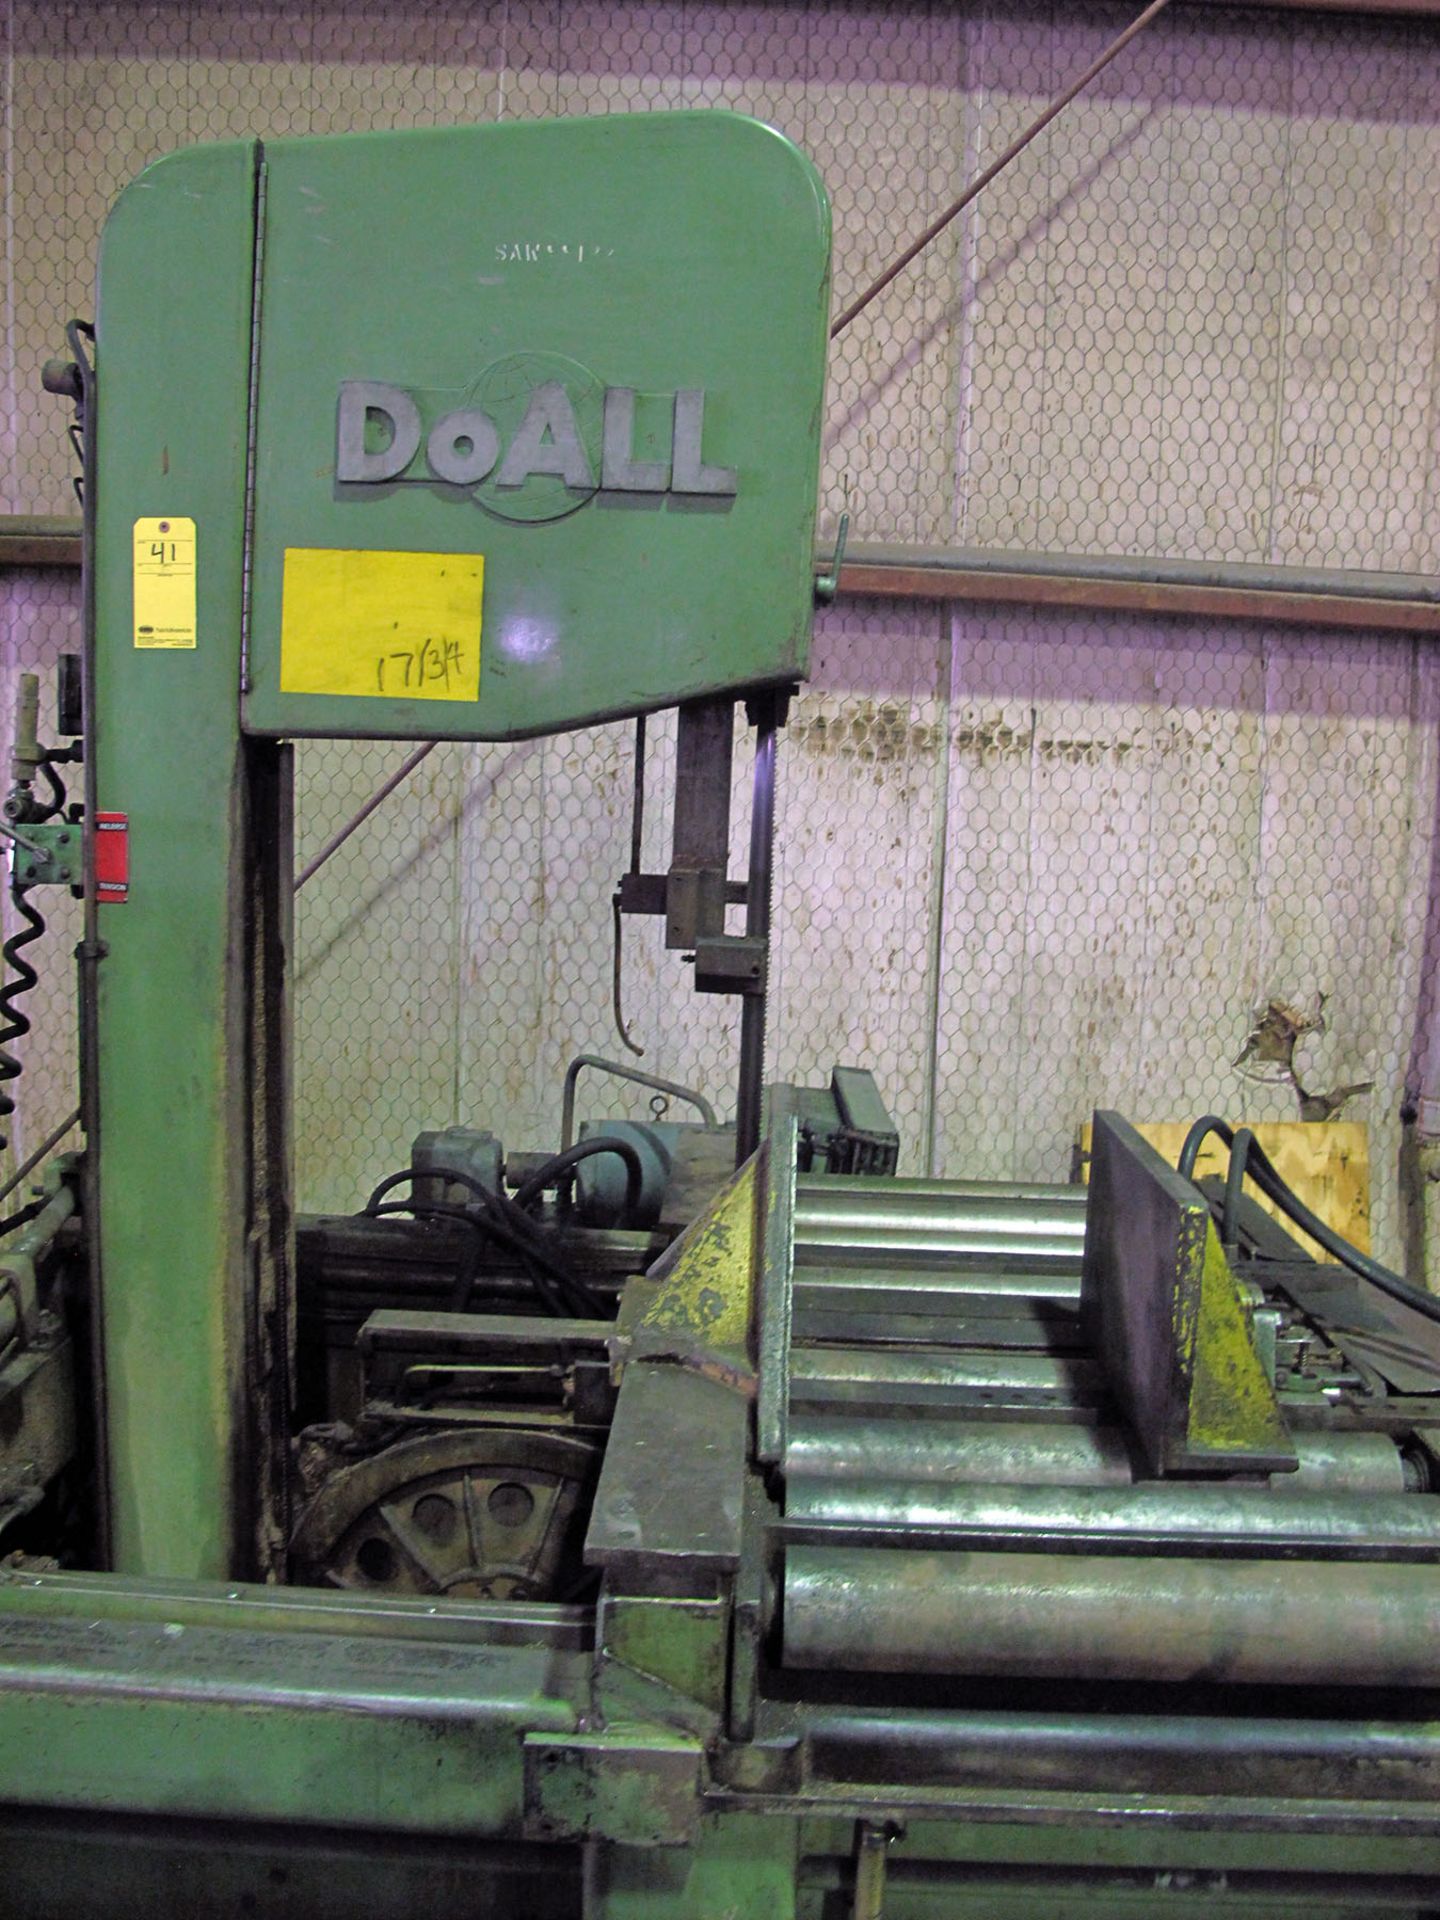 TILT FRAME SEMI-AUTOMATIC VERTICAL BANDSAW, DOALL 24" X 24", Mdl. TF24SA, 6,000 lbs. table load - Image 3 of 8